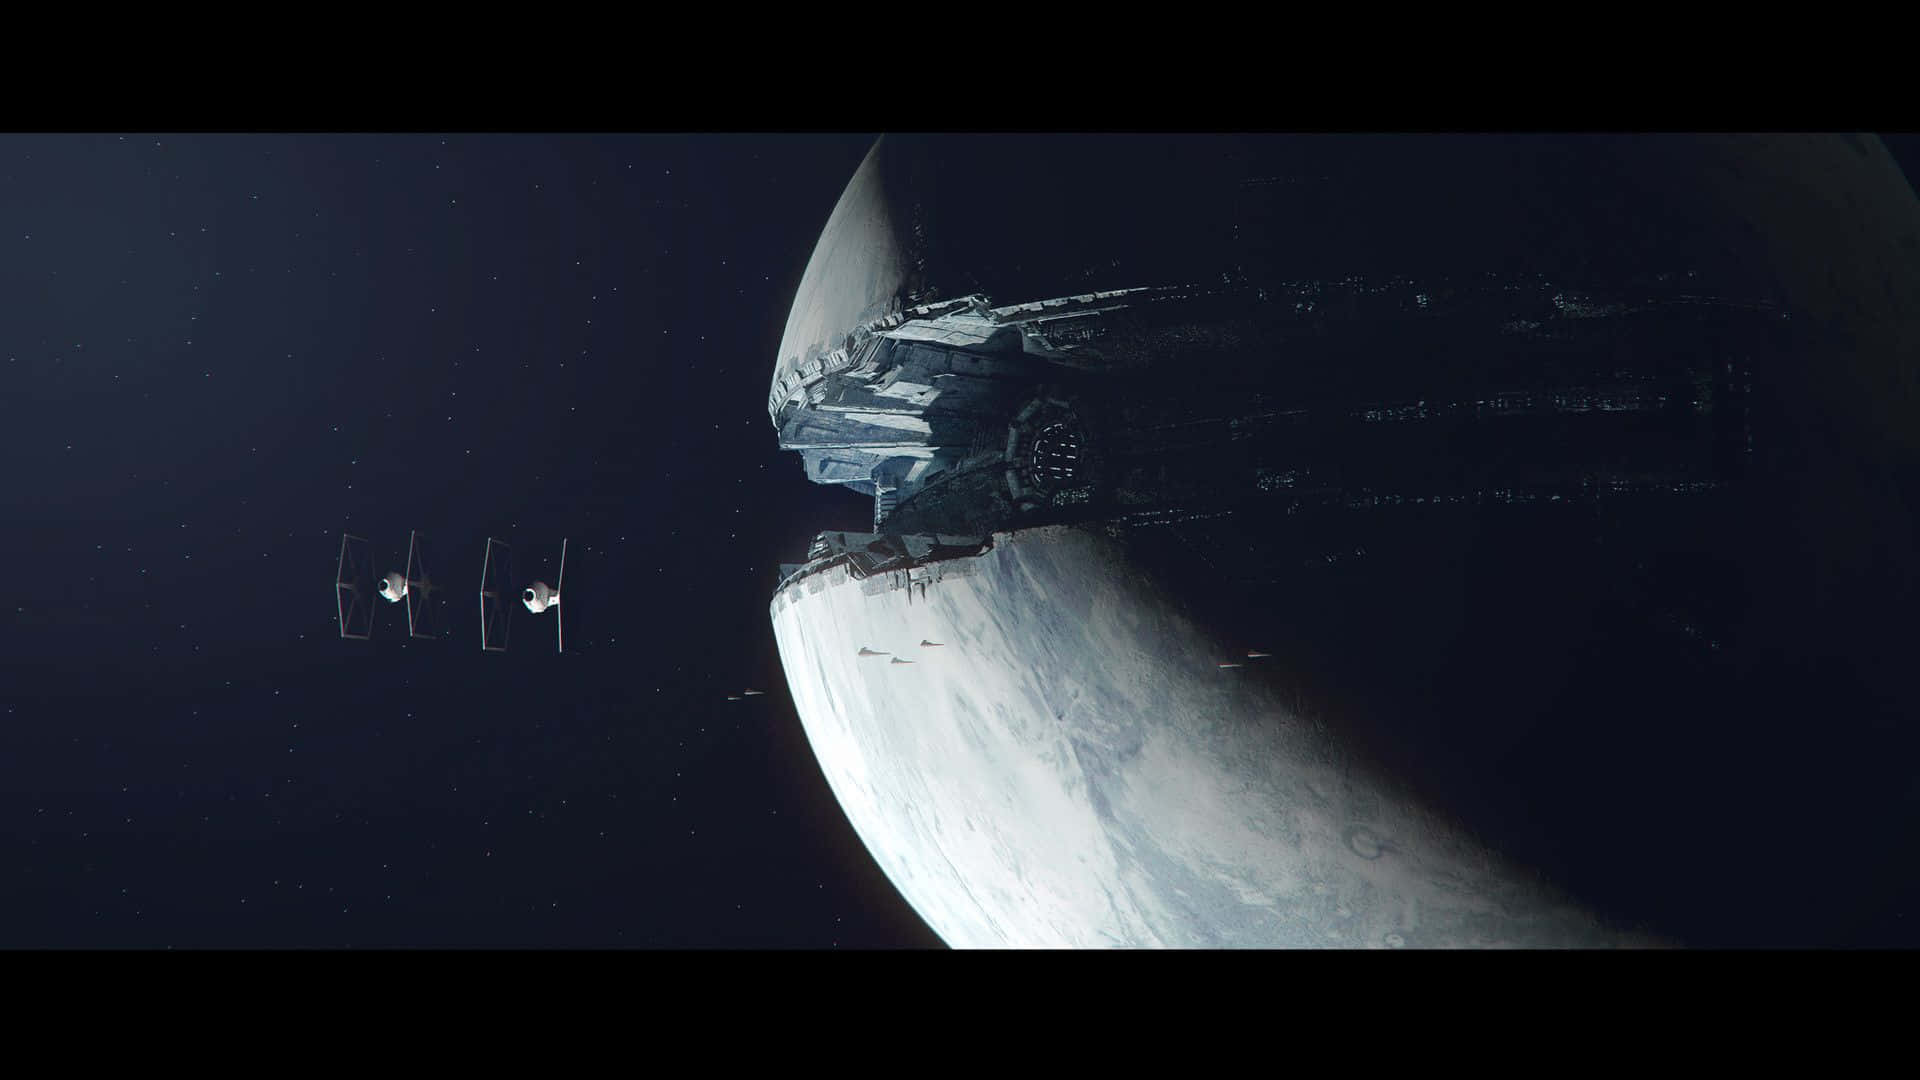 The Starkiller Base is prepared to launch a devastating blow against the Resistance Wallpaper